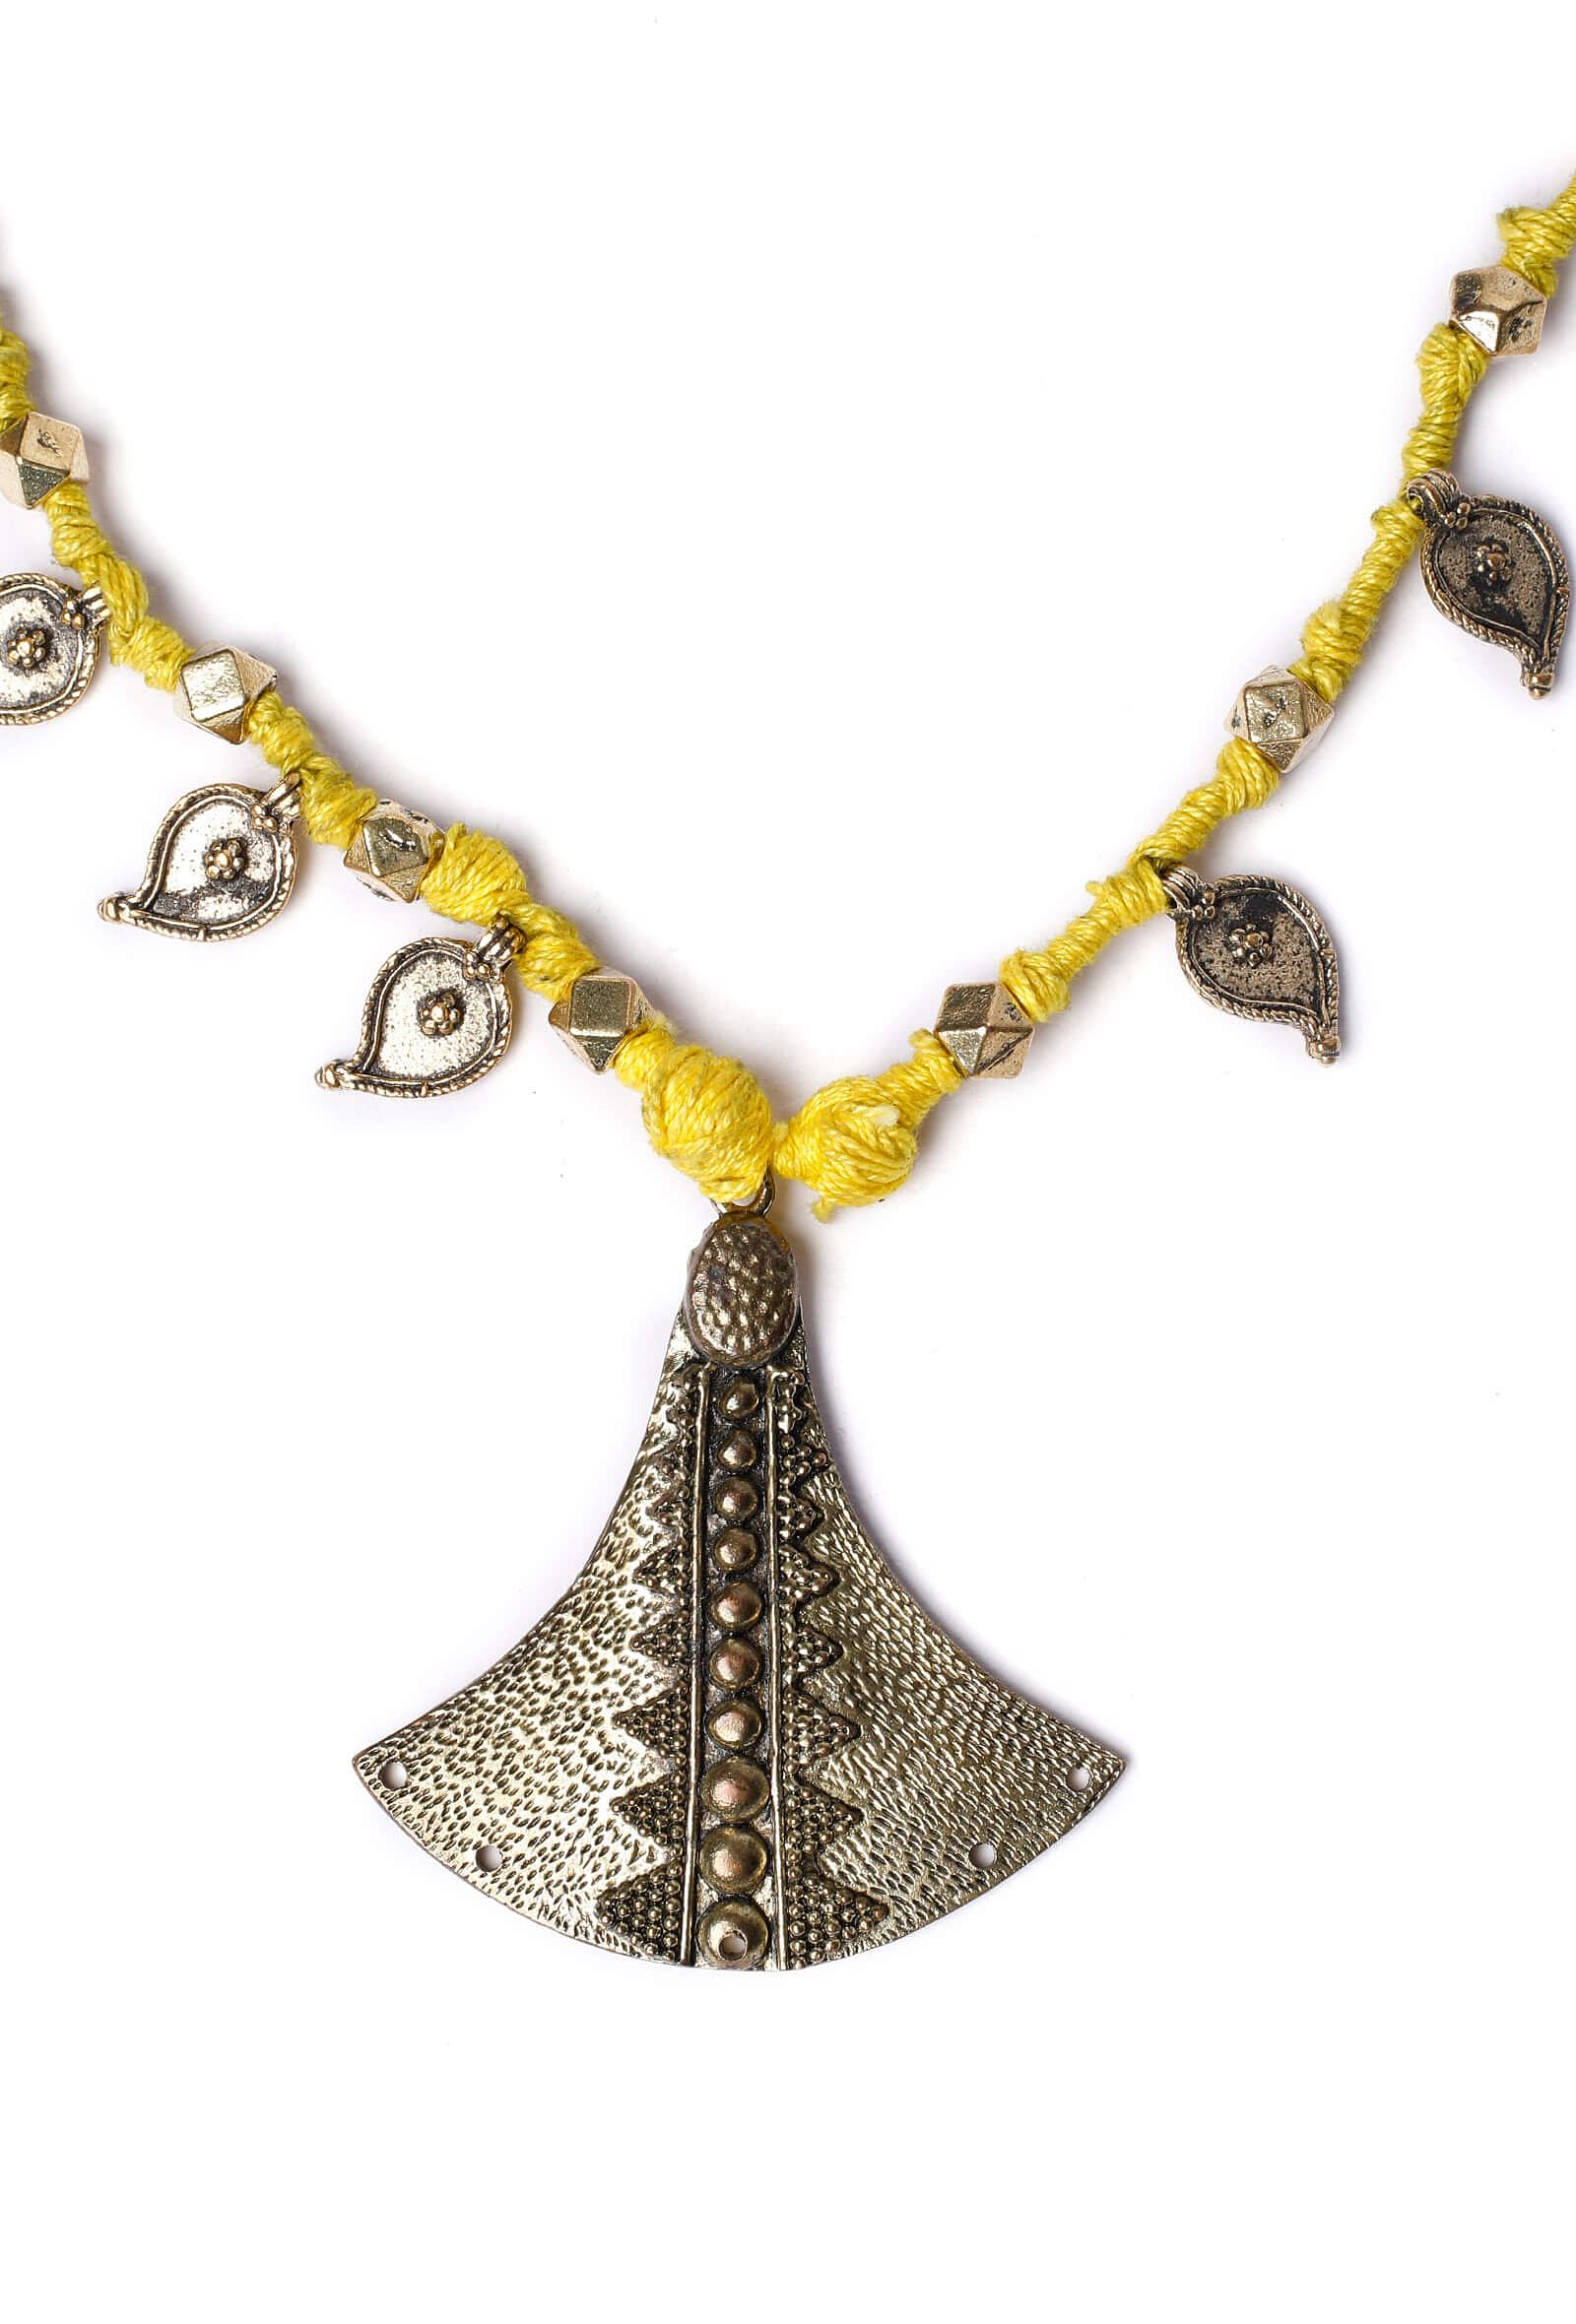 Dhokra-Inspired Yellow Thread Paisley Necklace